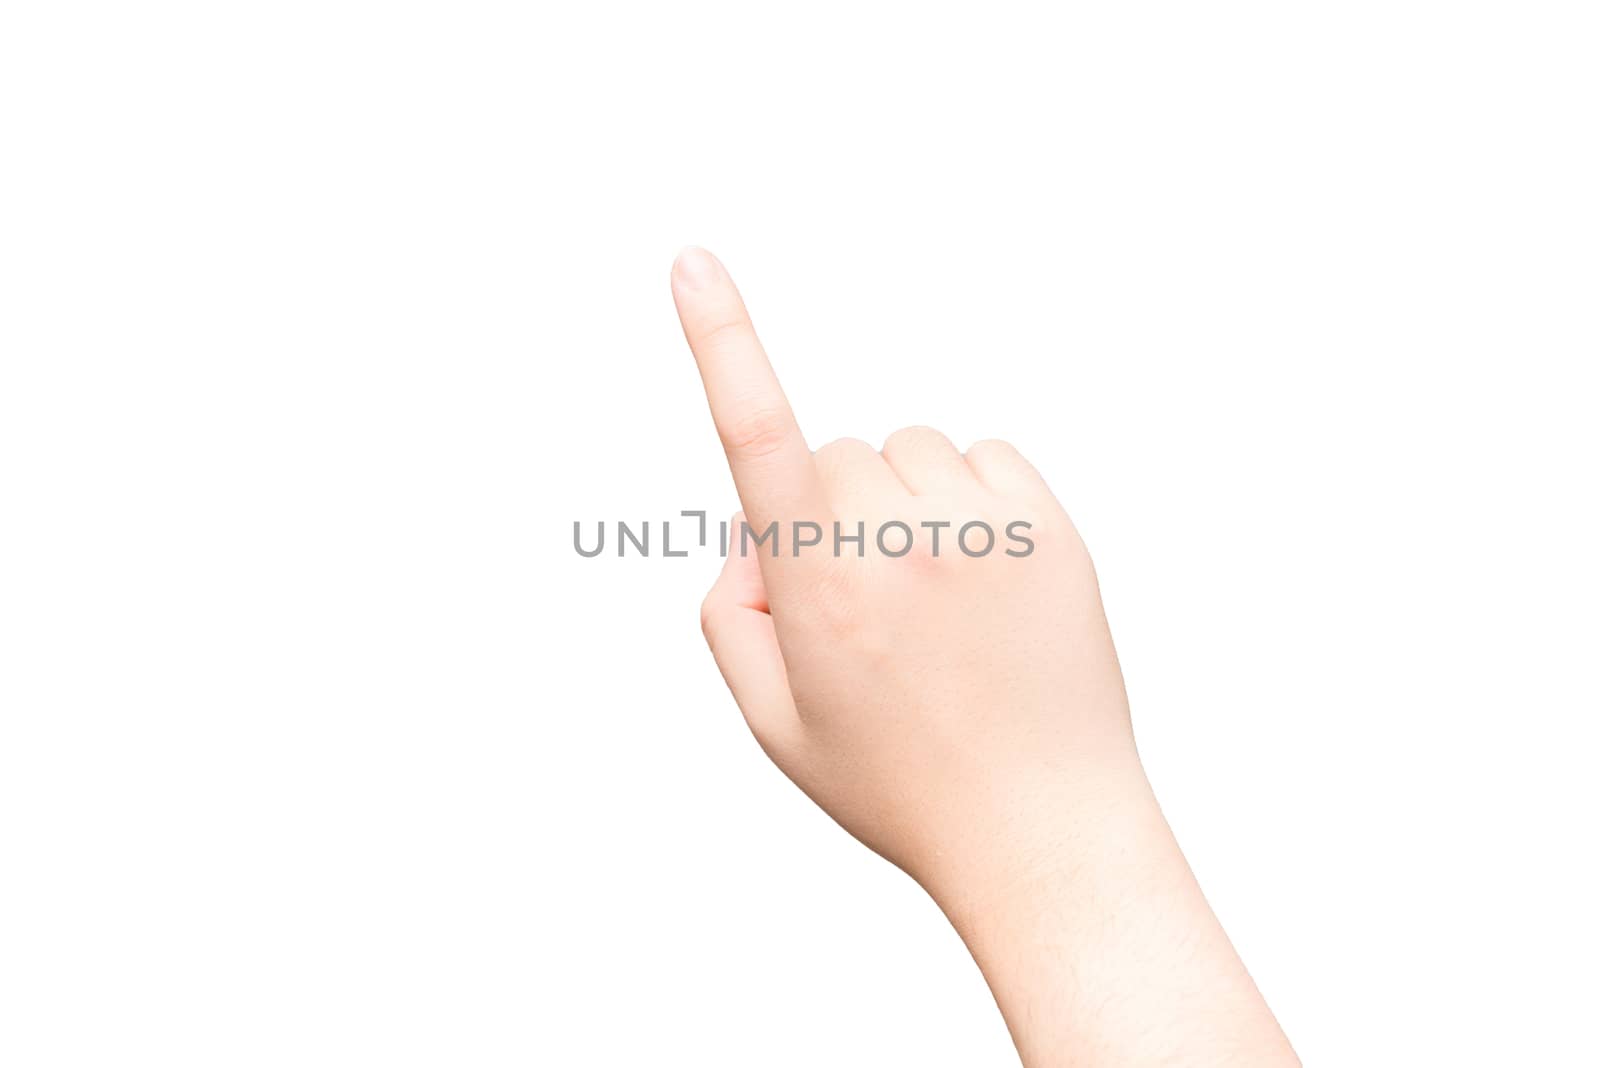 Human hand with one finger touching imaginary tablet on gray background